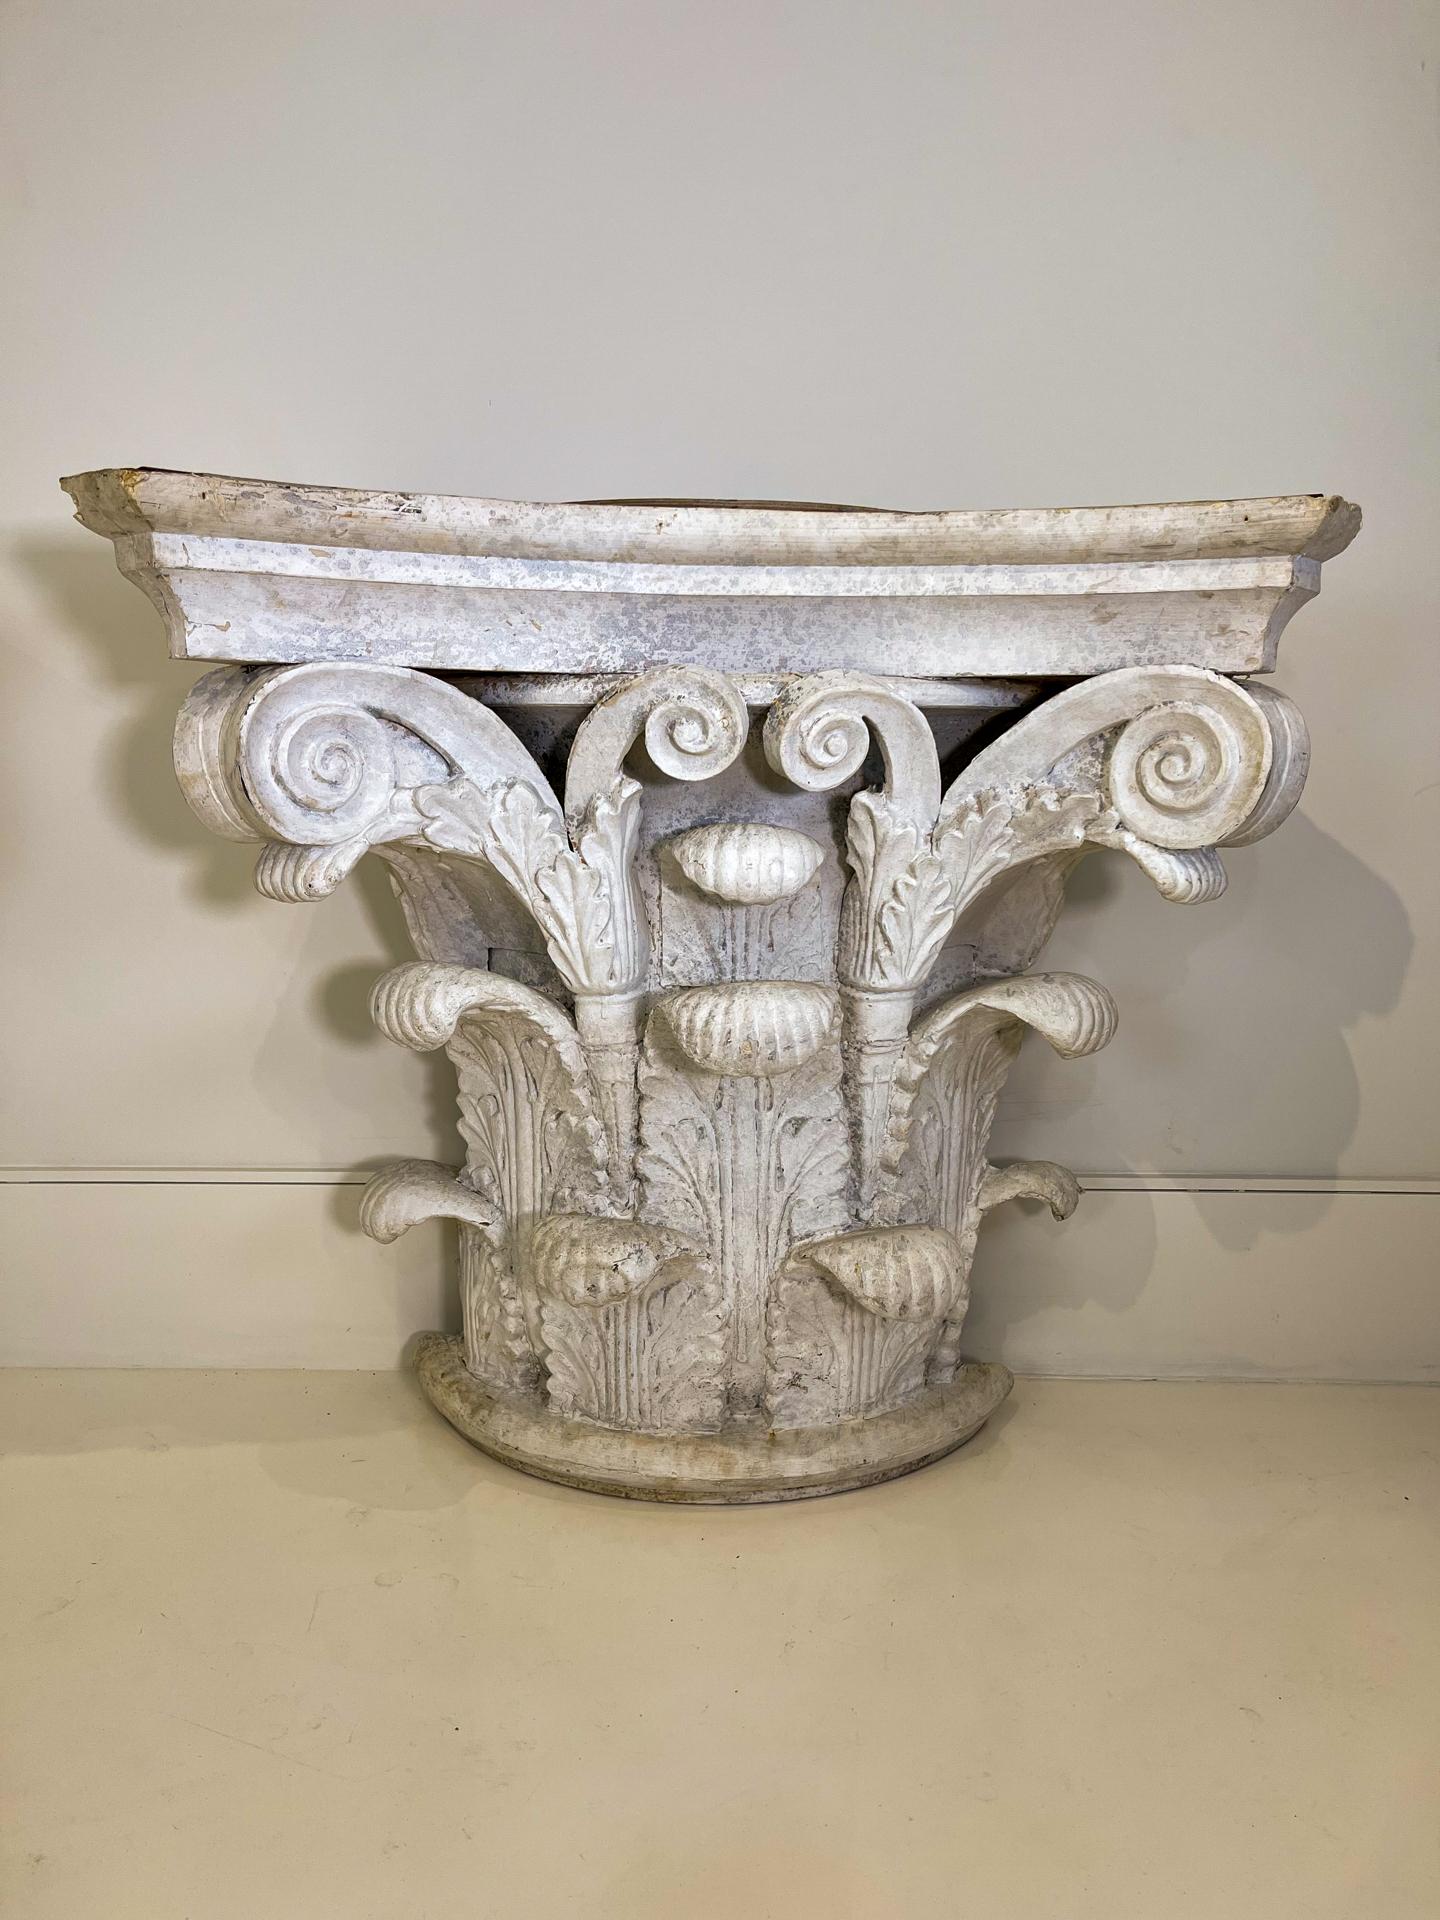 Dramatic Corinthian capital purchased in France - ideal for a console. Made of a metal frame with fiberglass form covered in plaster, all that is needed is a marble top. Would be fabulous flanking a fireplace or could be used as a bar if shelves are